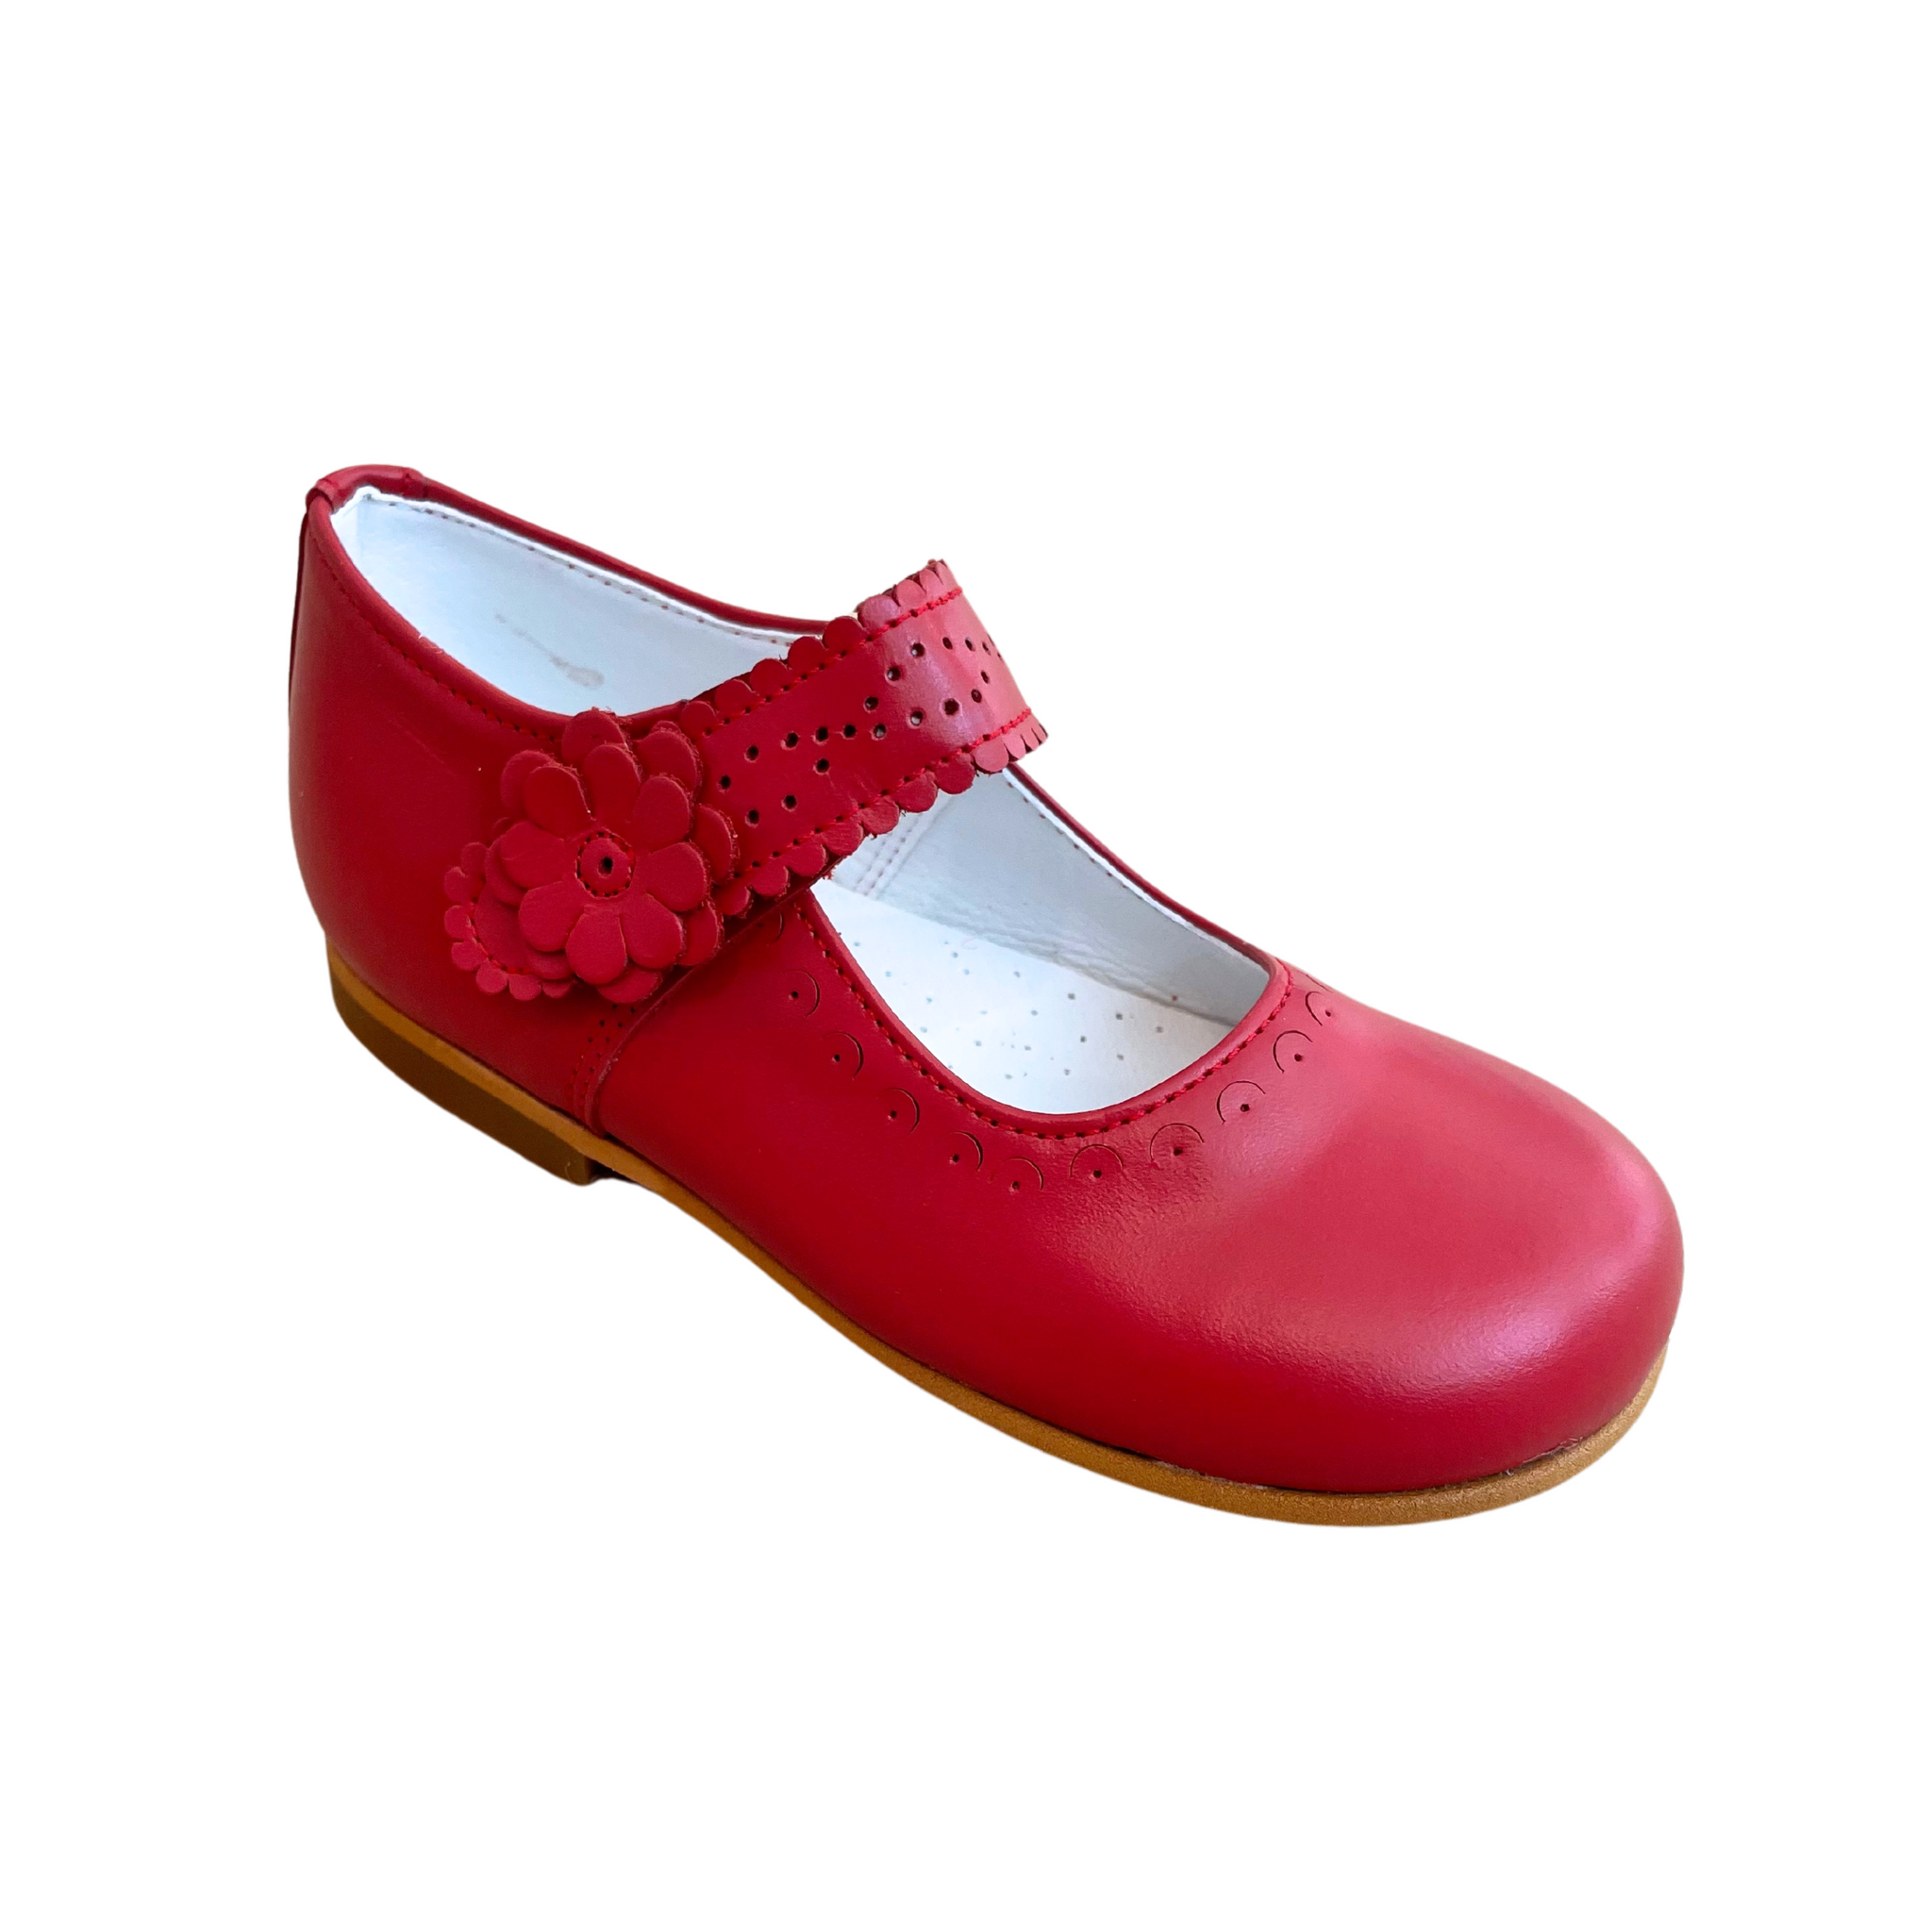 Papalotes Mary Jane Shoe Red Leather